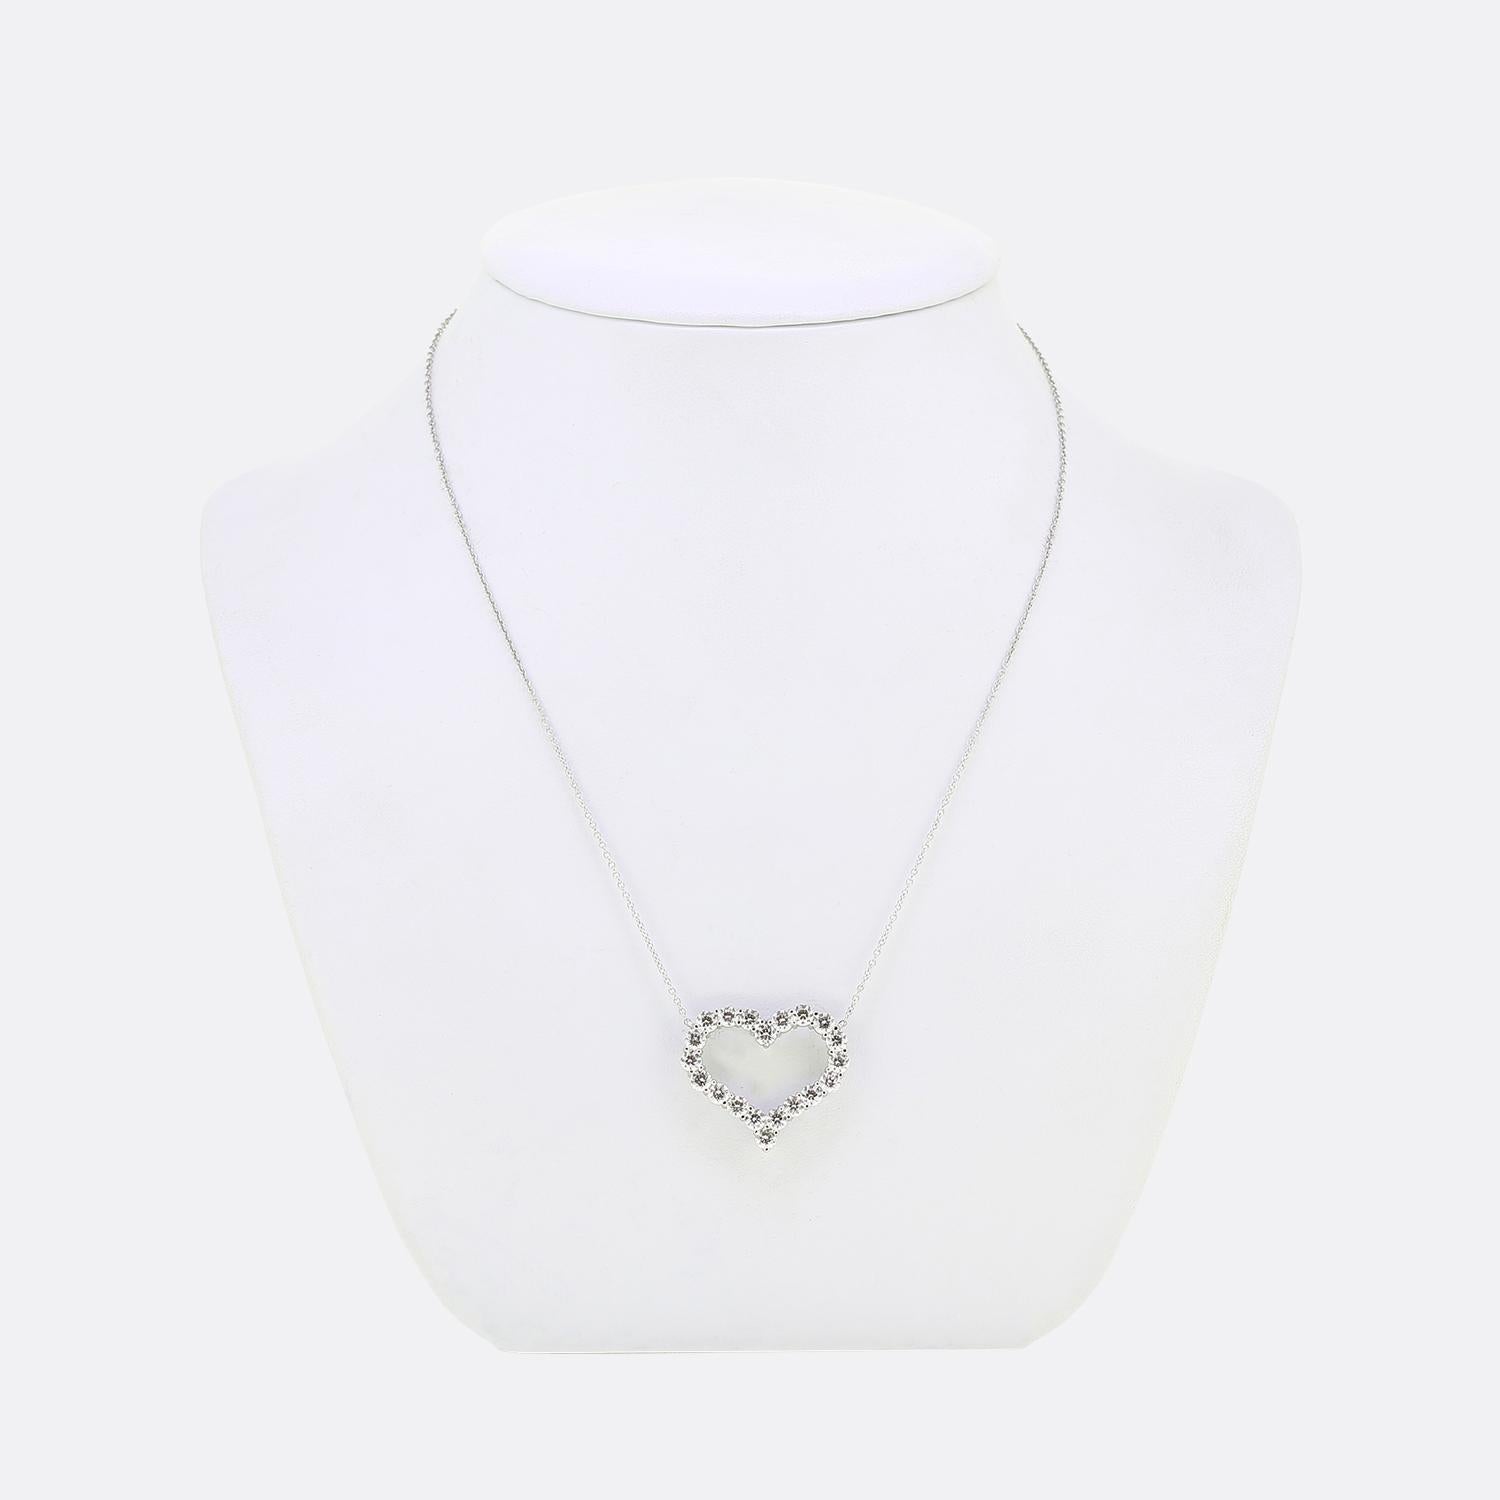 Here we have a wonderful necklace from the world renowned luxury jewellery designer Tiffany and Co. The pendant on show is formed from 20 round brilliant cut diamonds collectively following the shape of a love heart and hanging from a platinum